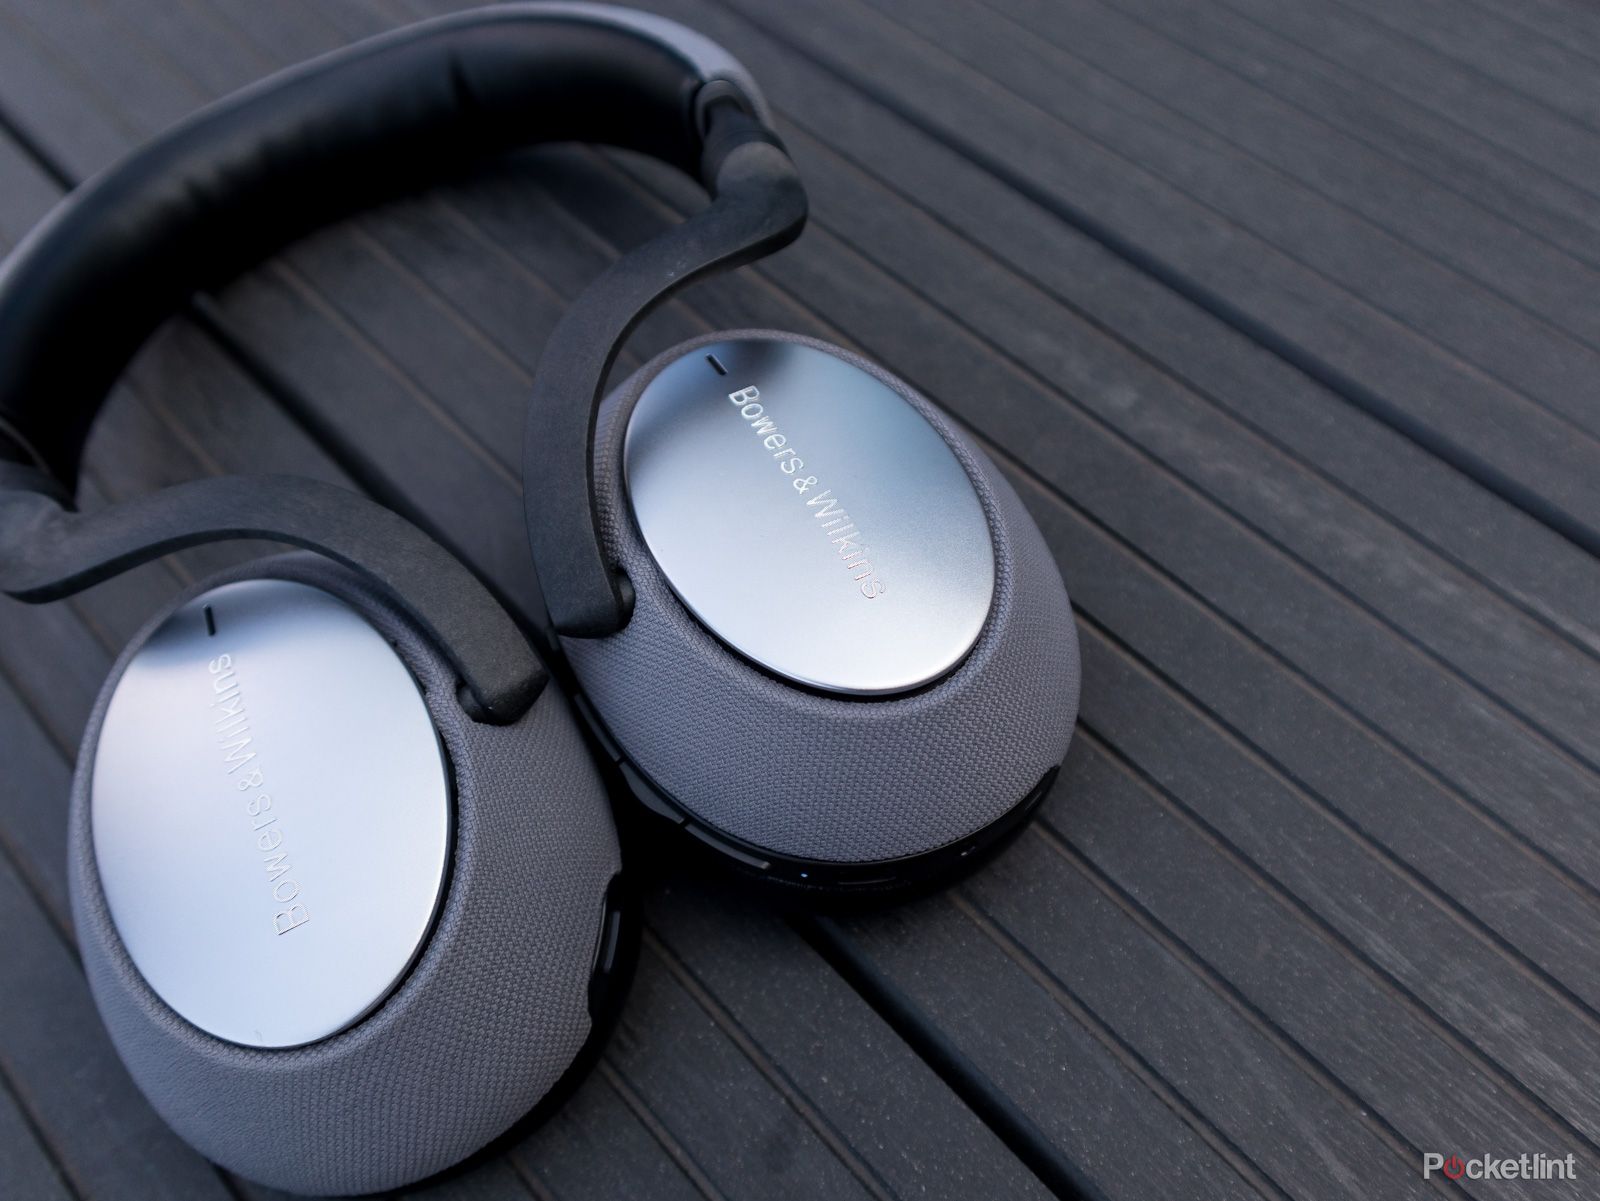 Bowers  Wilkins Px7 Leads New Wireless Headphones Range Also Includes Neckband Models image 1